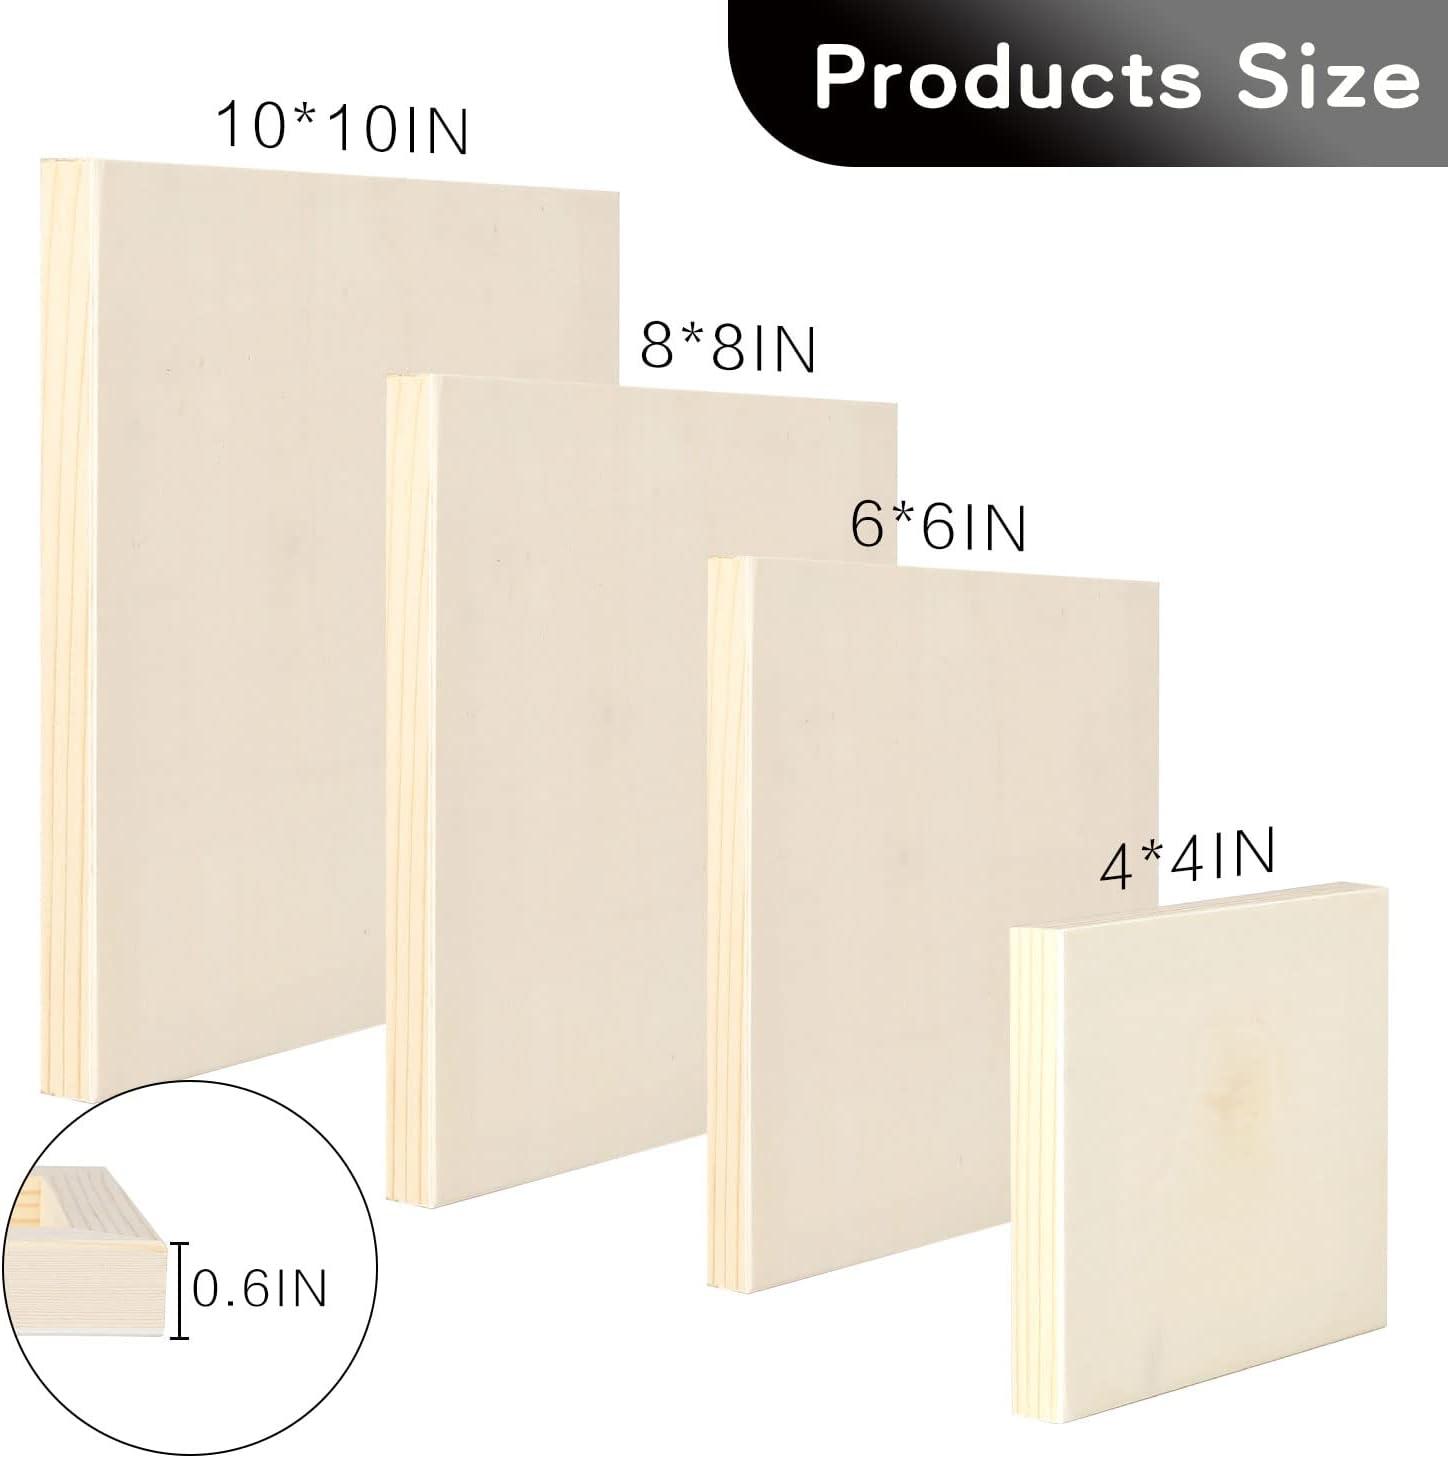  Blank Canvas Board Wooden Framed for Painting DIY Paint by  Numbers Kits Oil Painting 2 Pieces Pack (8x8 inch)